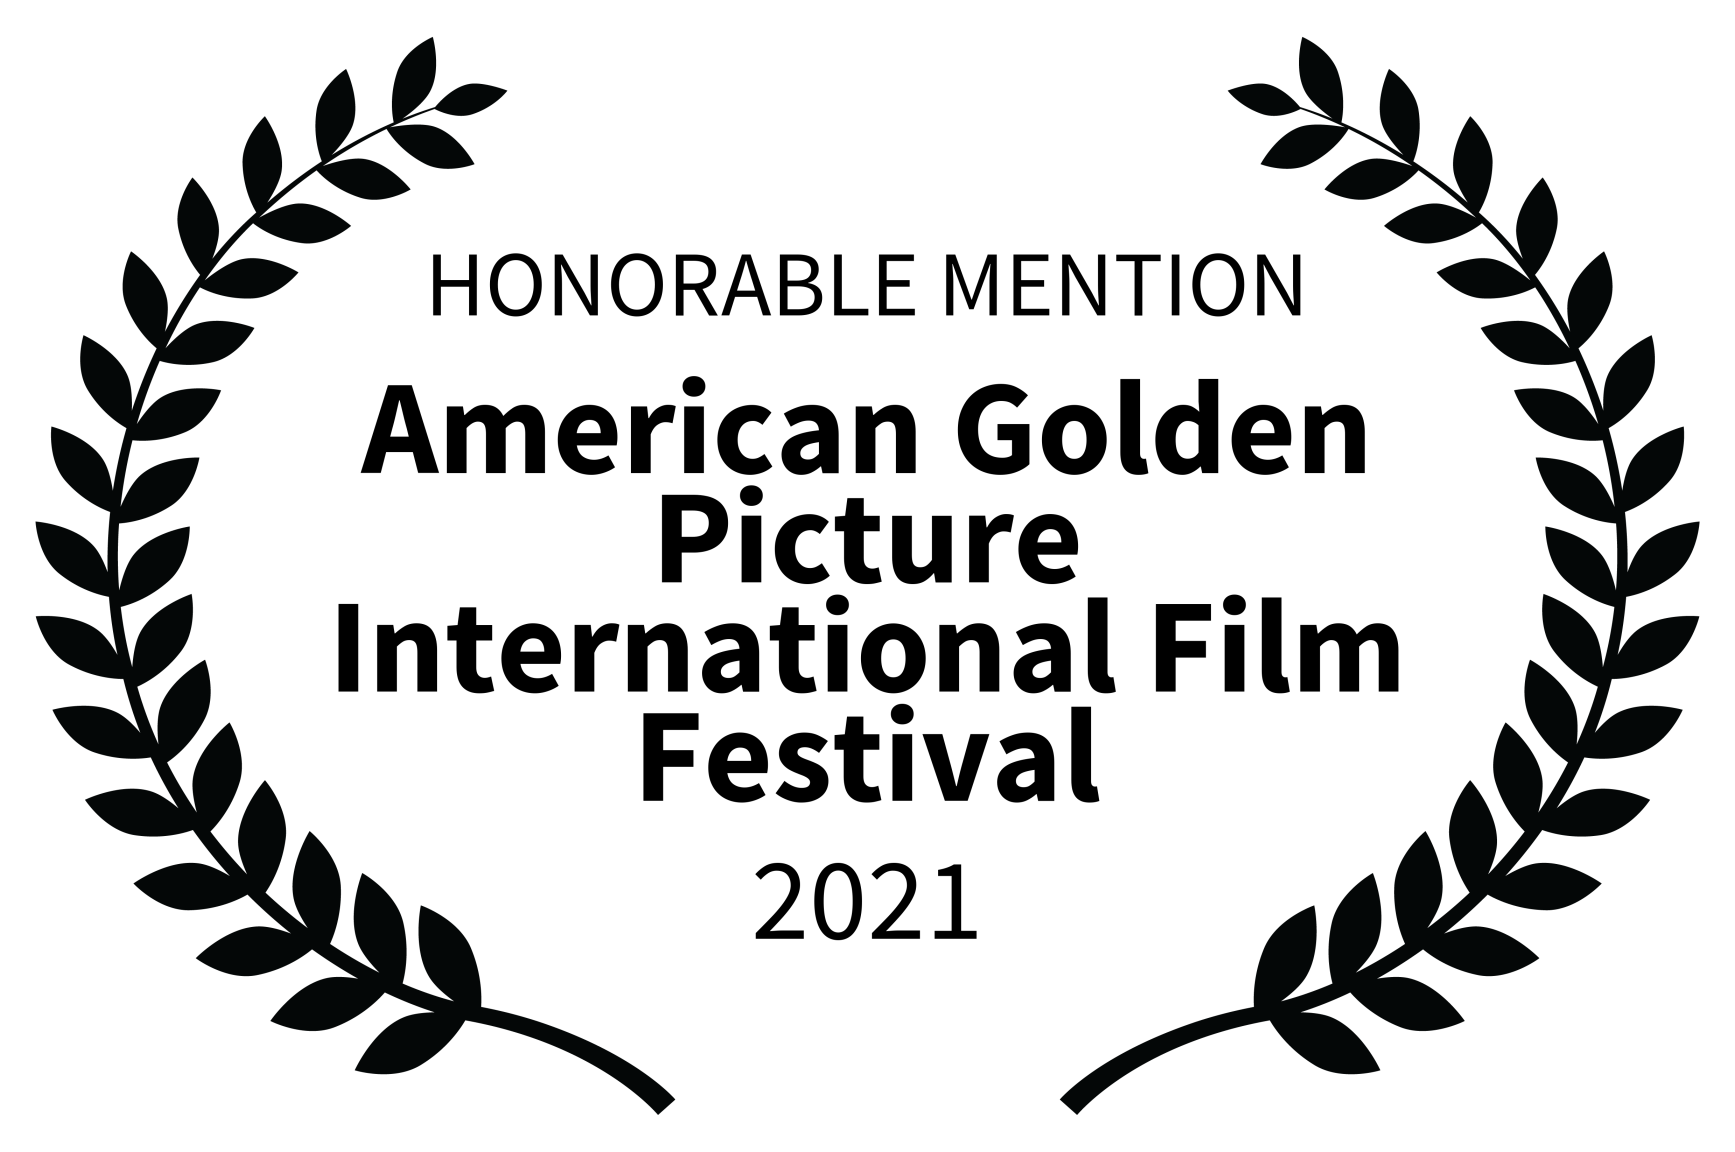 HONORABLE MENTION - American Golden Picture International Film Festival - 2021 (1)